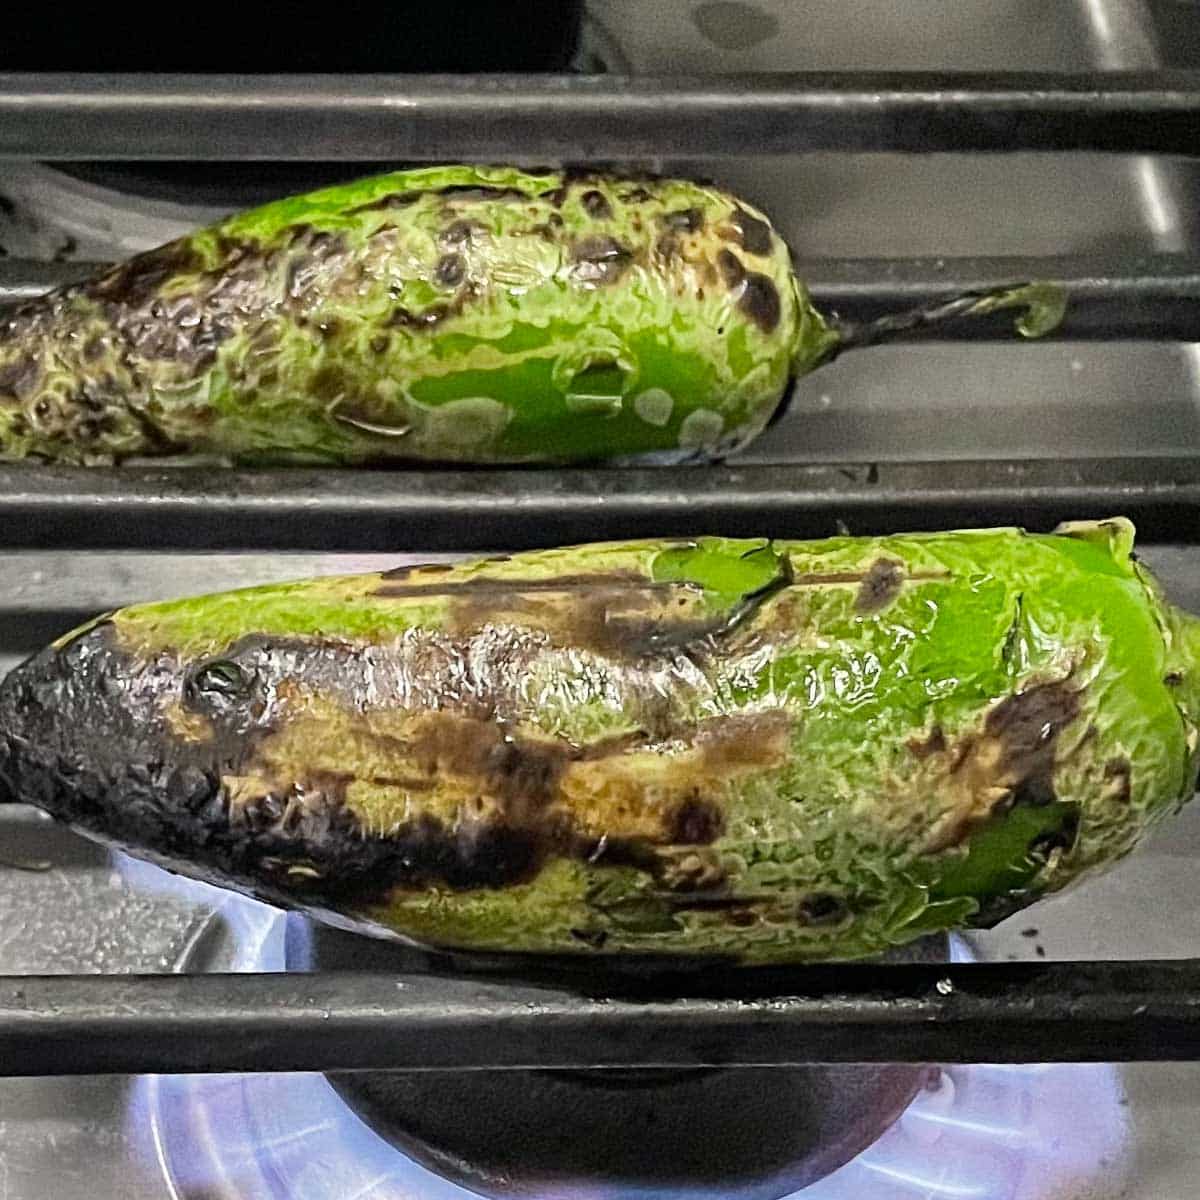 Two jalapenos are roasted over a gas flame on a stovetop.